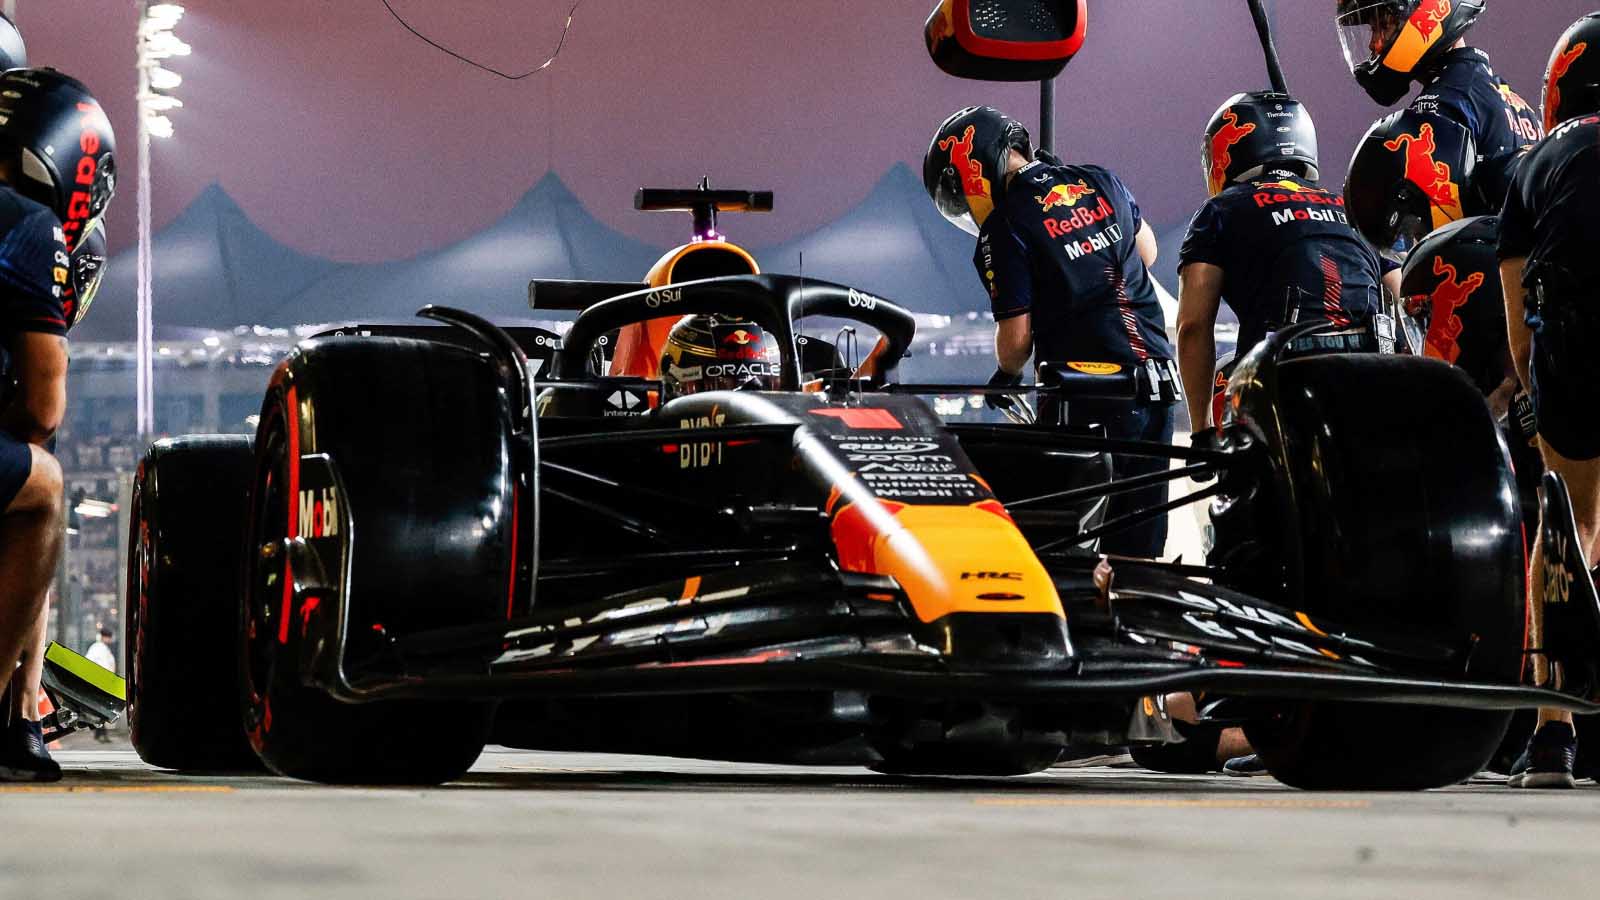 2018 DHL Fastest Pit Stop Award - F1 Race Results